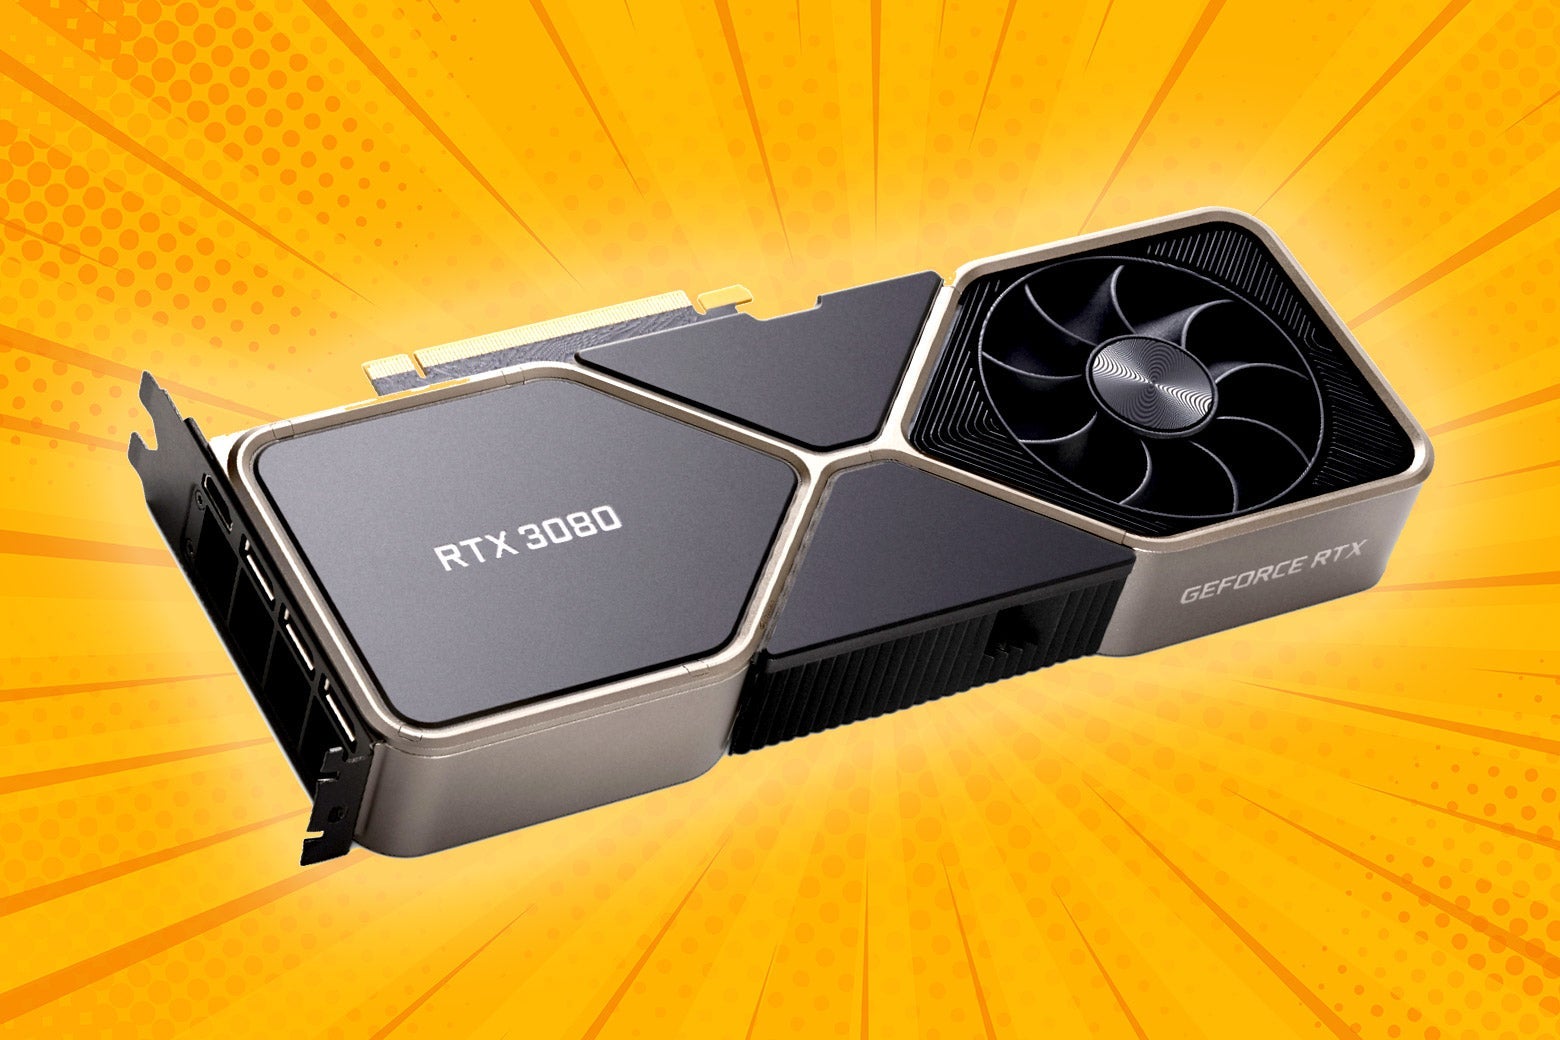 An Nvidia GeForce RTX 30 video card with a yellow starburst behind it.